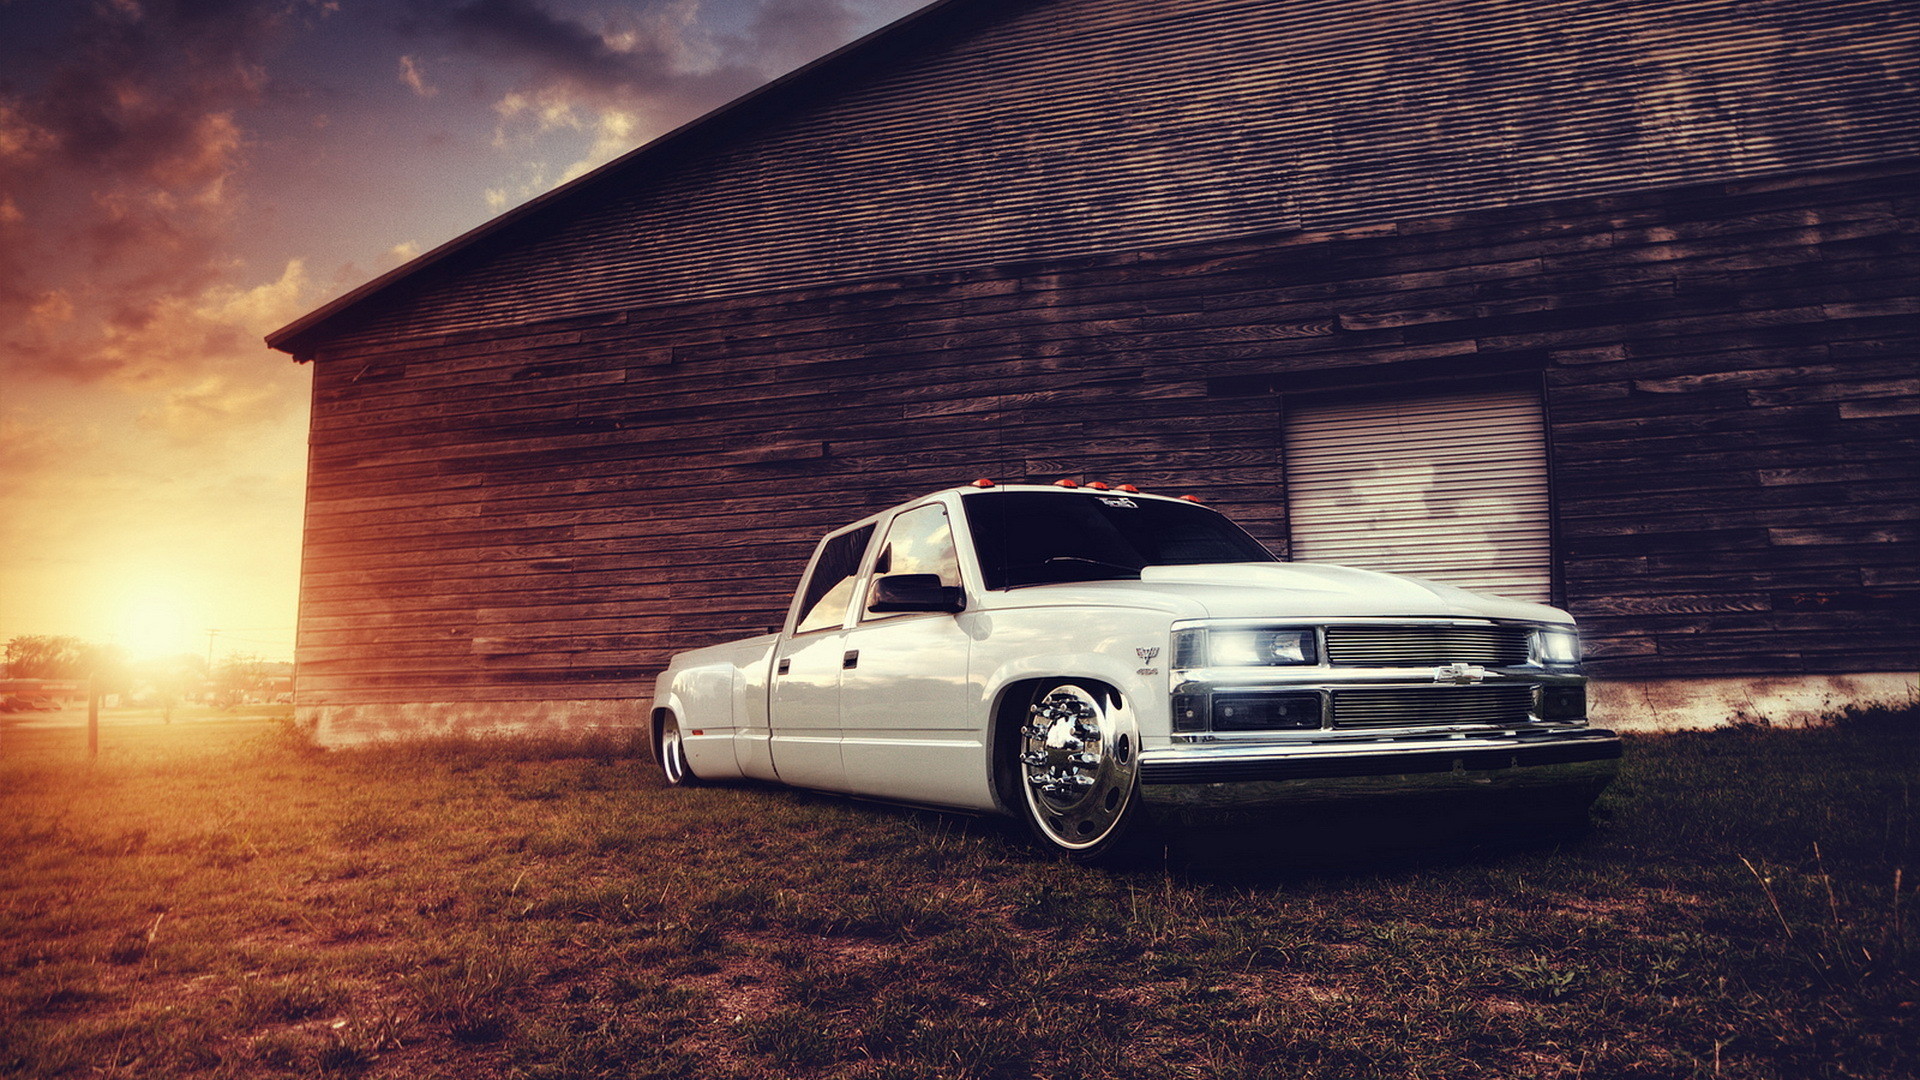 1920x1080 Chevrolet truck tuning white building lowrider sunset wallpaper |   | 73203 | WallpaperUP